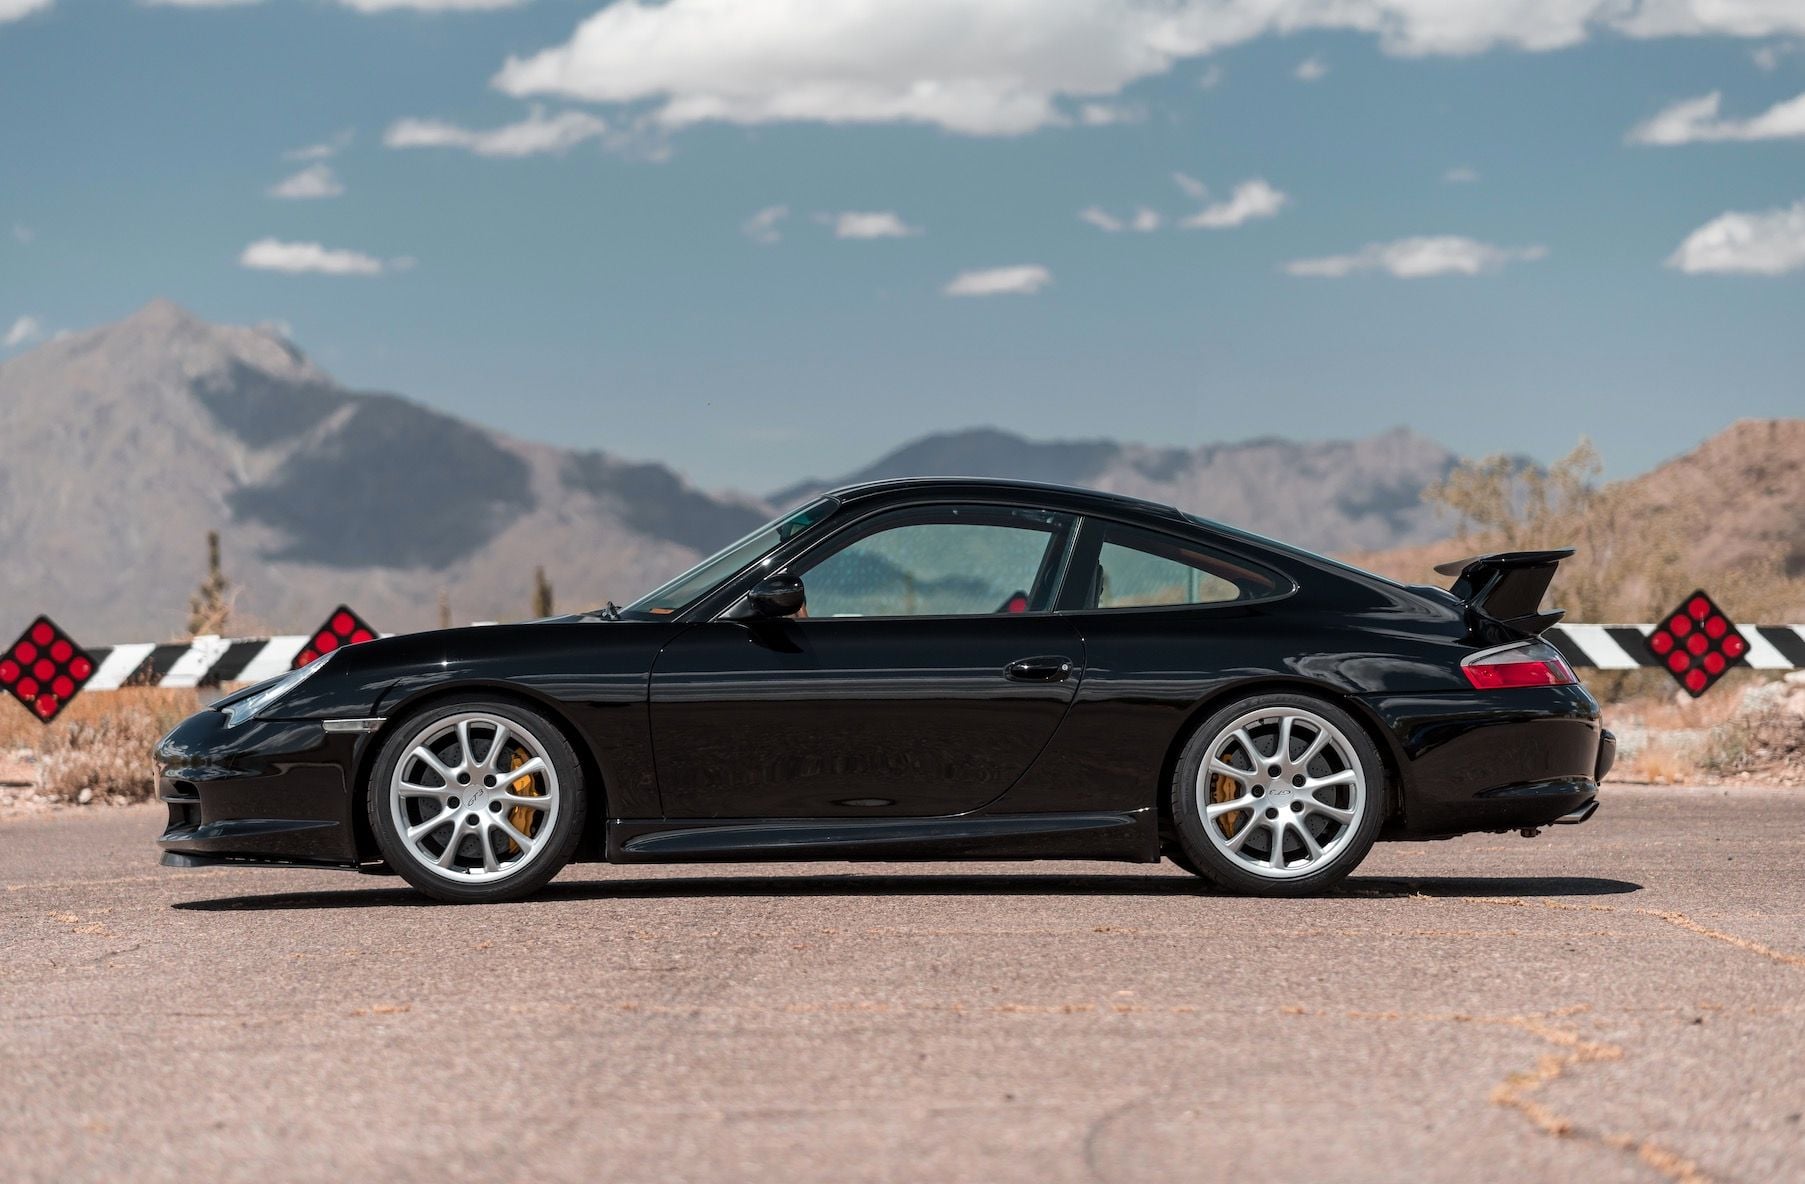 2004 Porsche GT3 - 2004 GT3 - Used - VIN WP0AC29994S692391 - 58,150 Miles - 6 cyl - 2WD - Manual - Coupe - Black - Gilbert, AZ 85296, United States